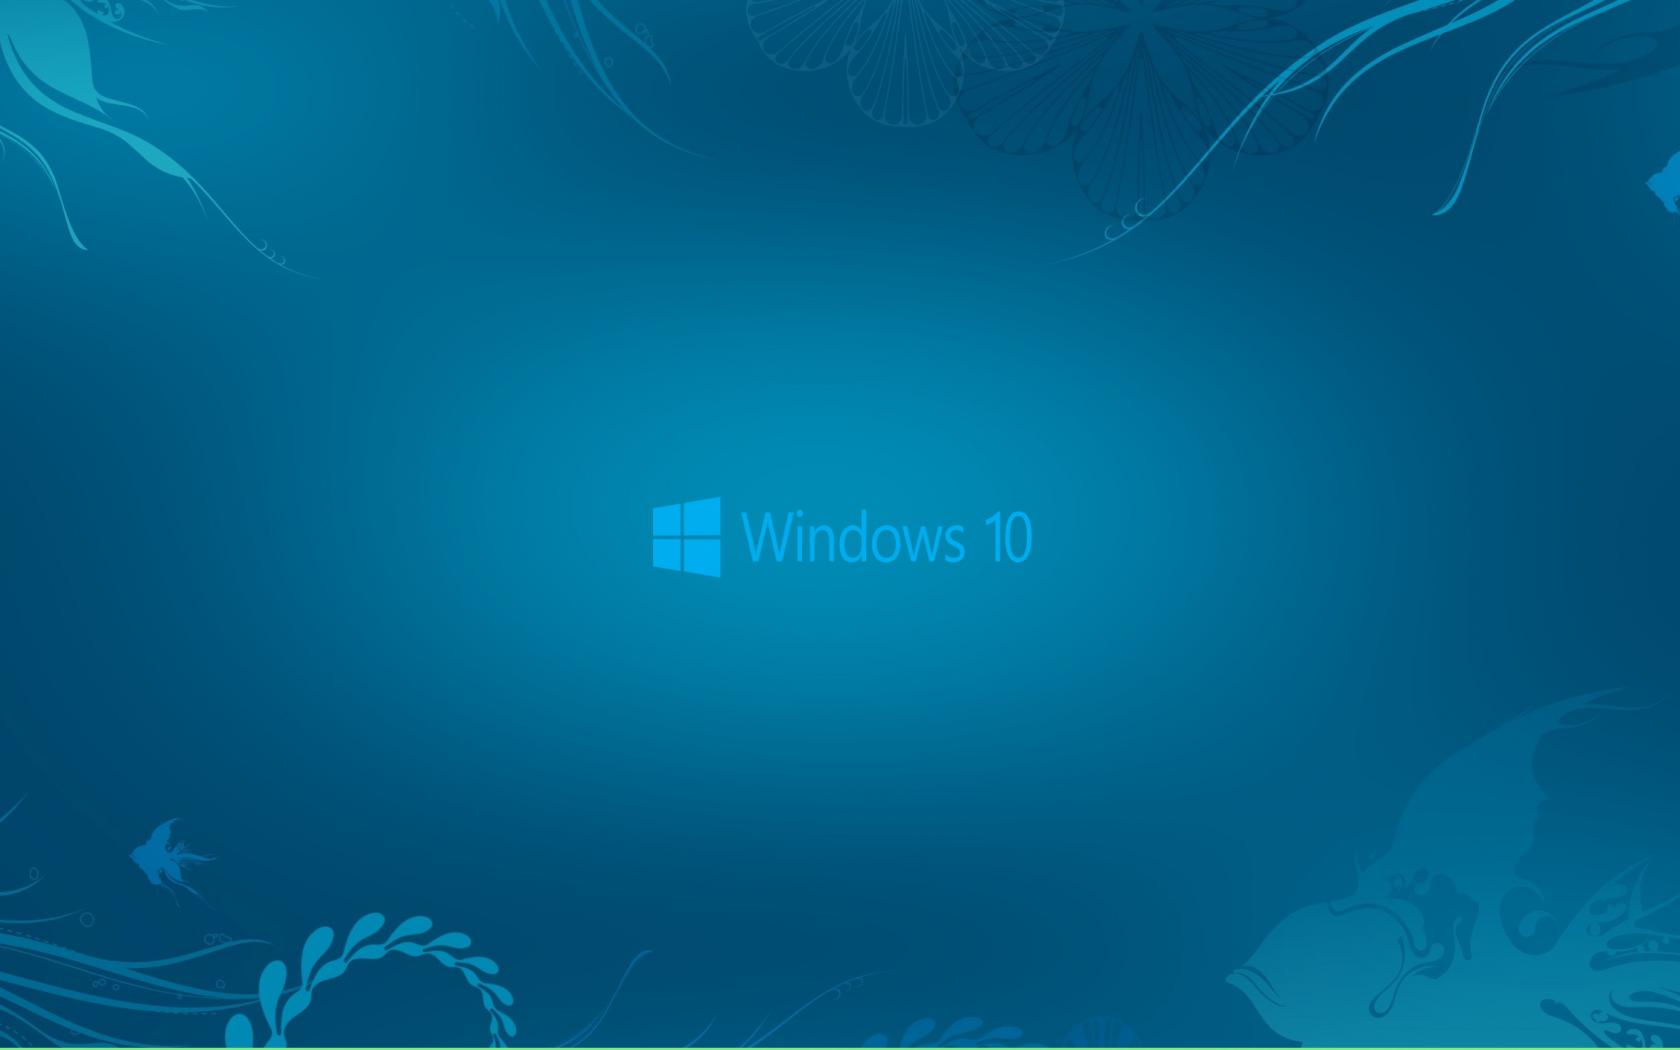 Windows 10 Wallpaper in Abstract Deep Blue See and New Logo HD